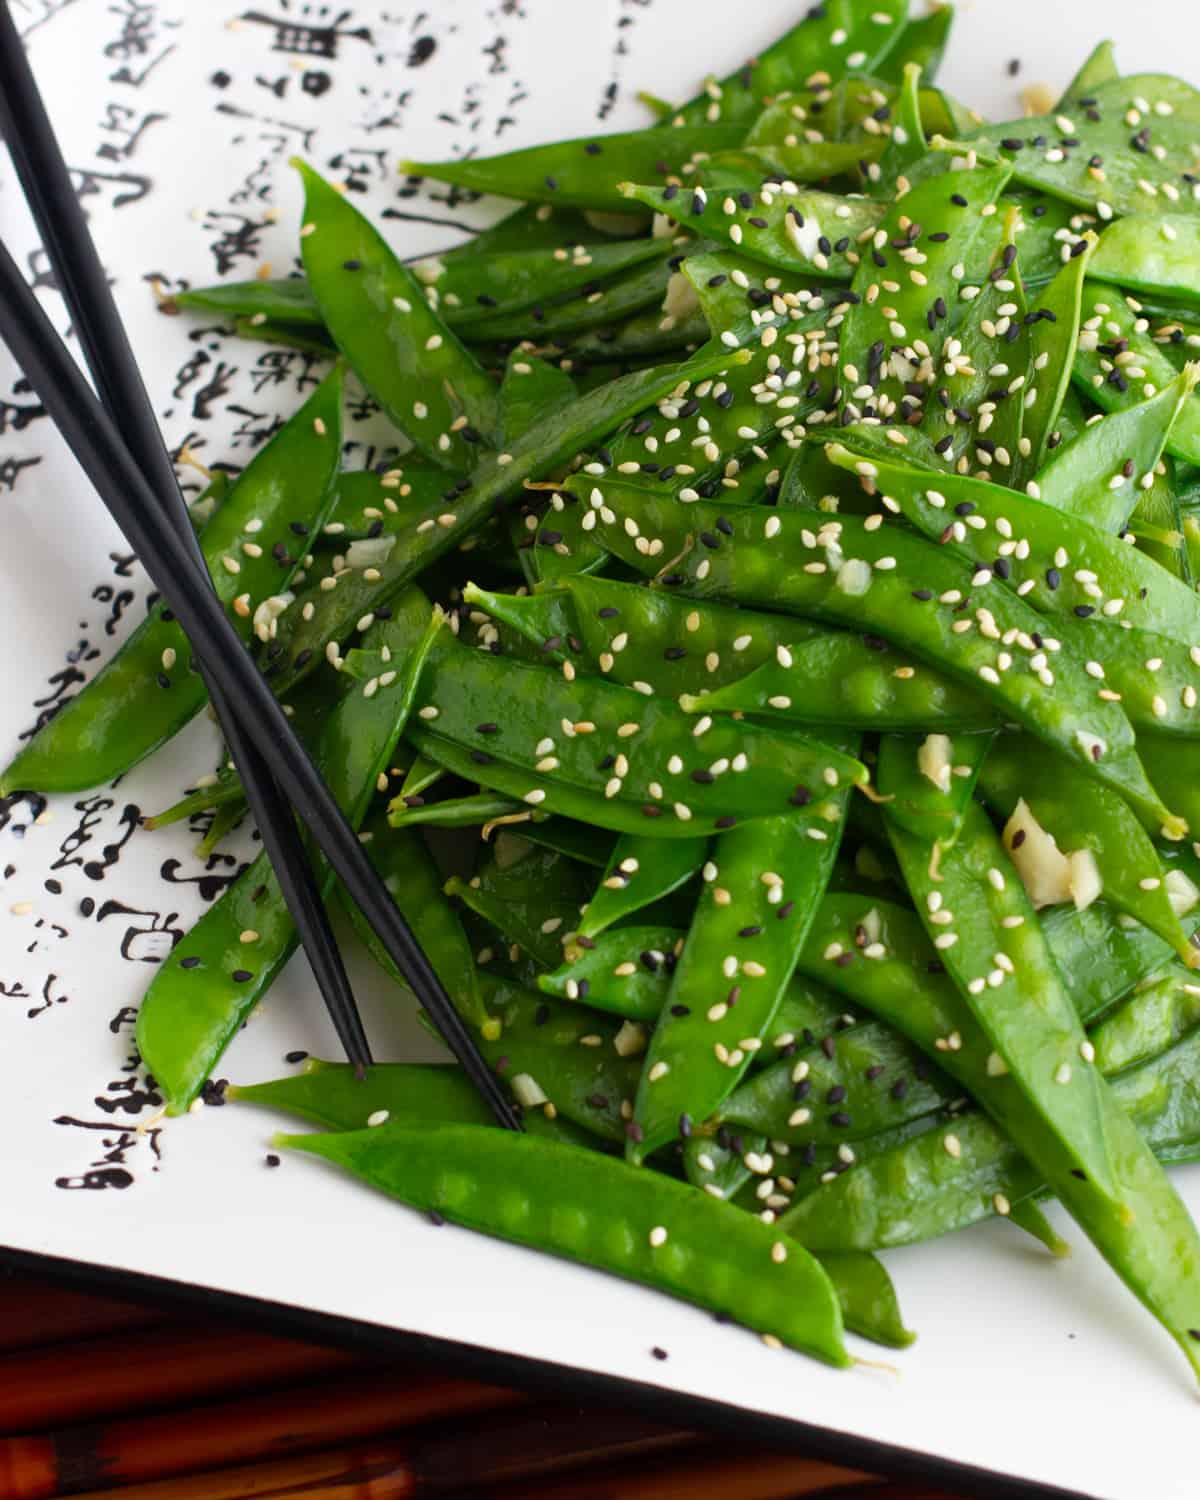 A close up picture of a plate of snow peas garnished with sesame seeds.